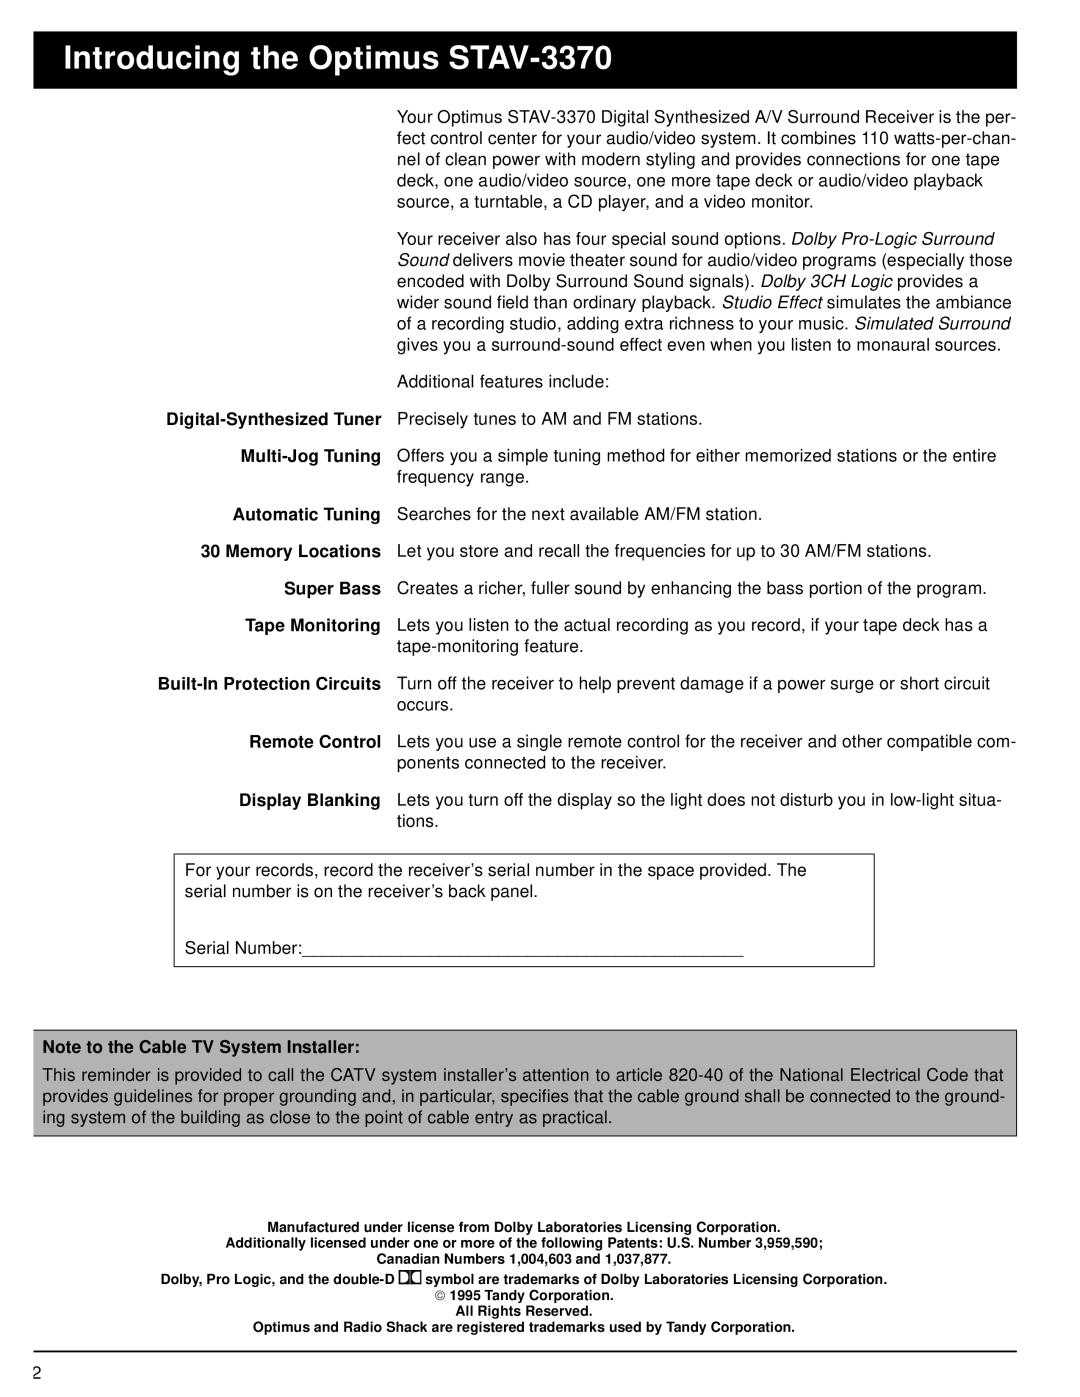 Optimus owner manual Introducing the Optimus STAV-3370, Note to the Cable TV System Installer 